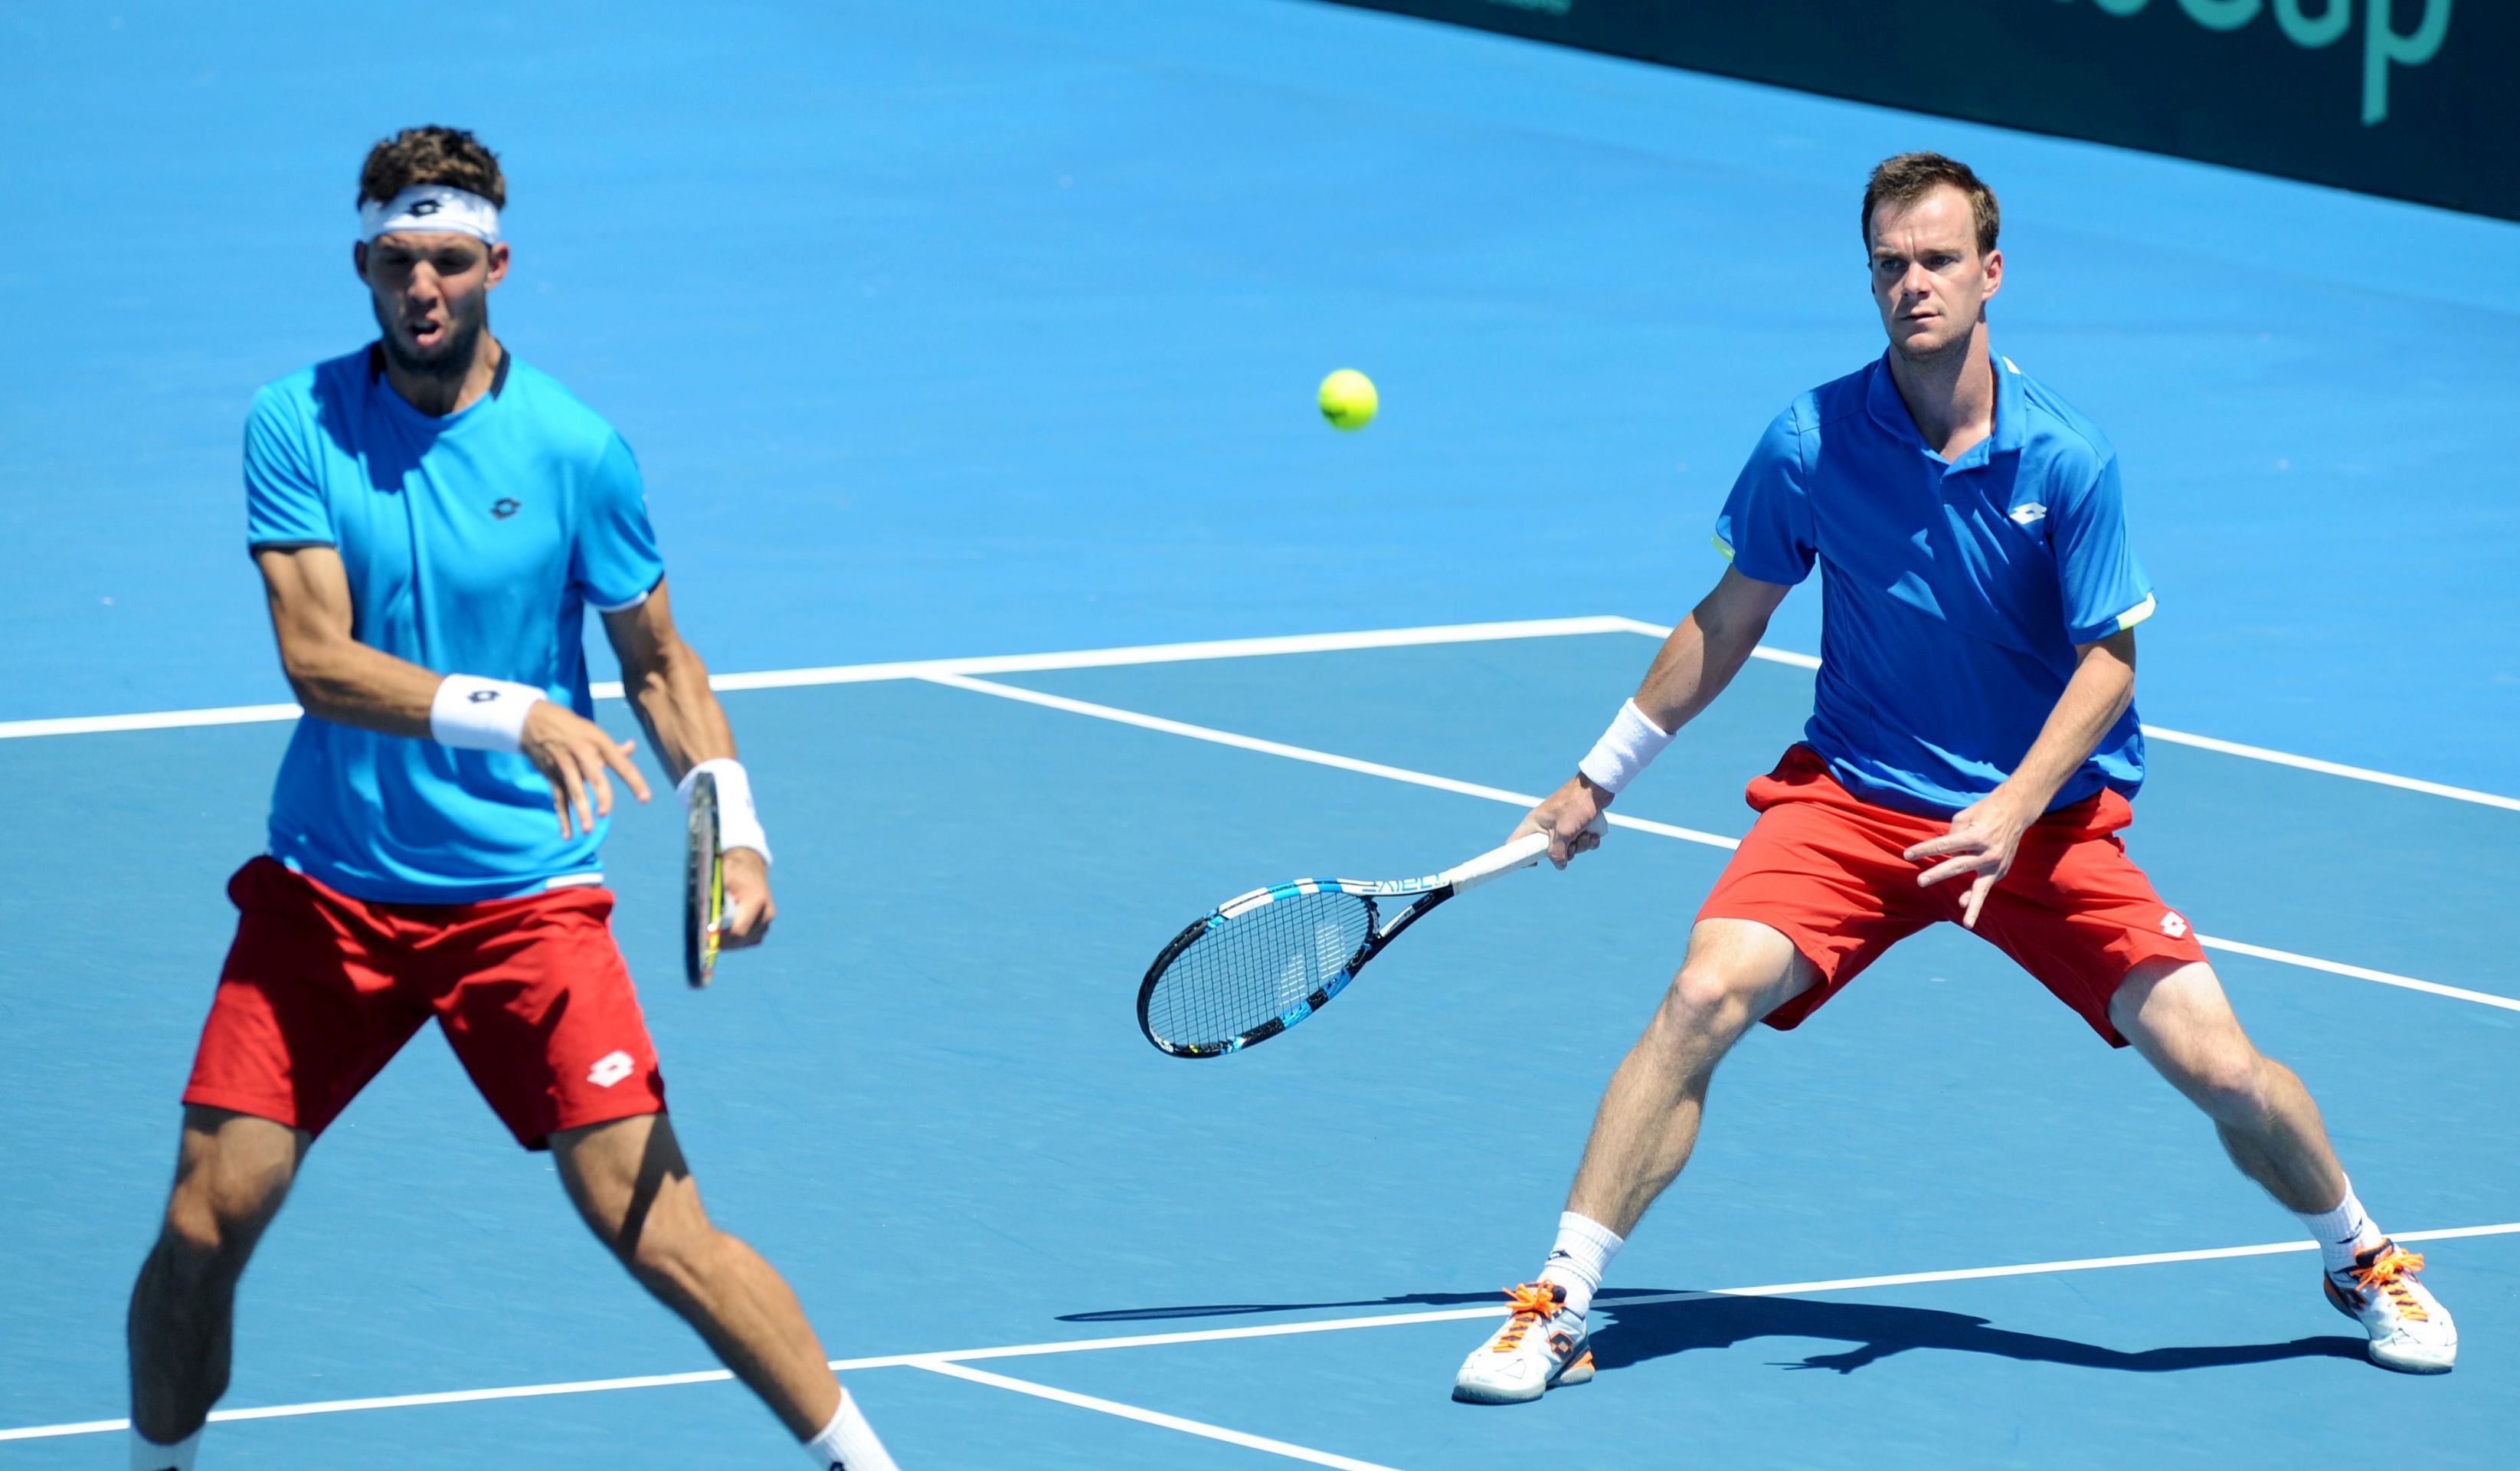 epa05769912 Jiri Vesely (L) and Jan Satral (R) of the Czech Republic in action against Sam Groth and John Peers of Australia during the Australia vs the Czech Republic Davis Cup first round match at Kooyong in Melbourne, Australia, 04 February 2017.  EPA/JOE CASTRO  AUSTRALIA AND NEW ZEALAND OUT